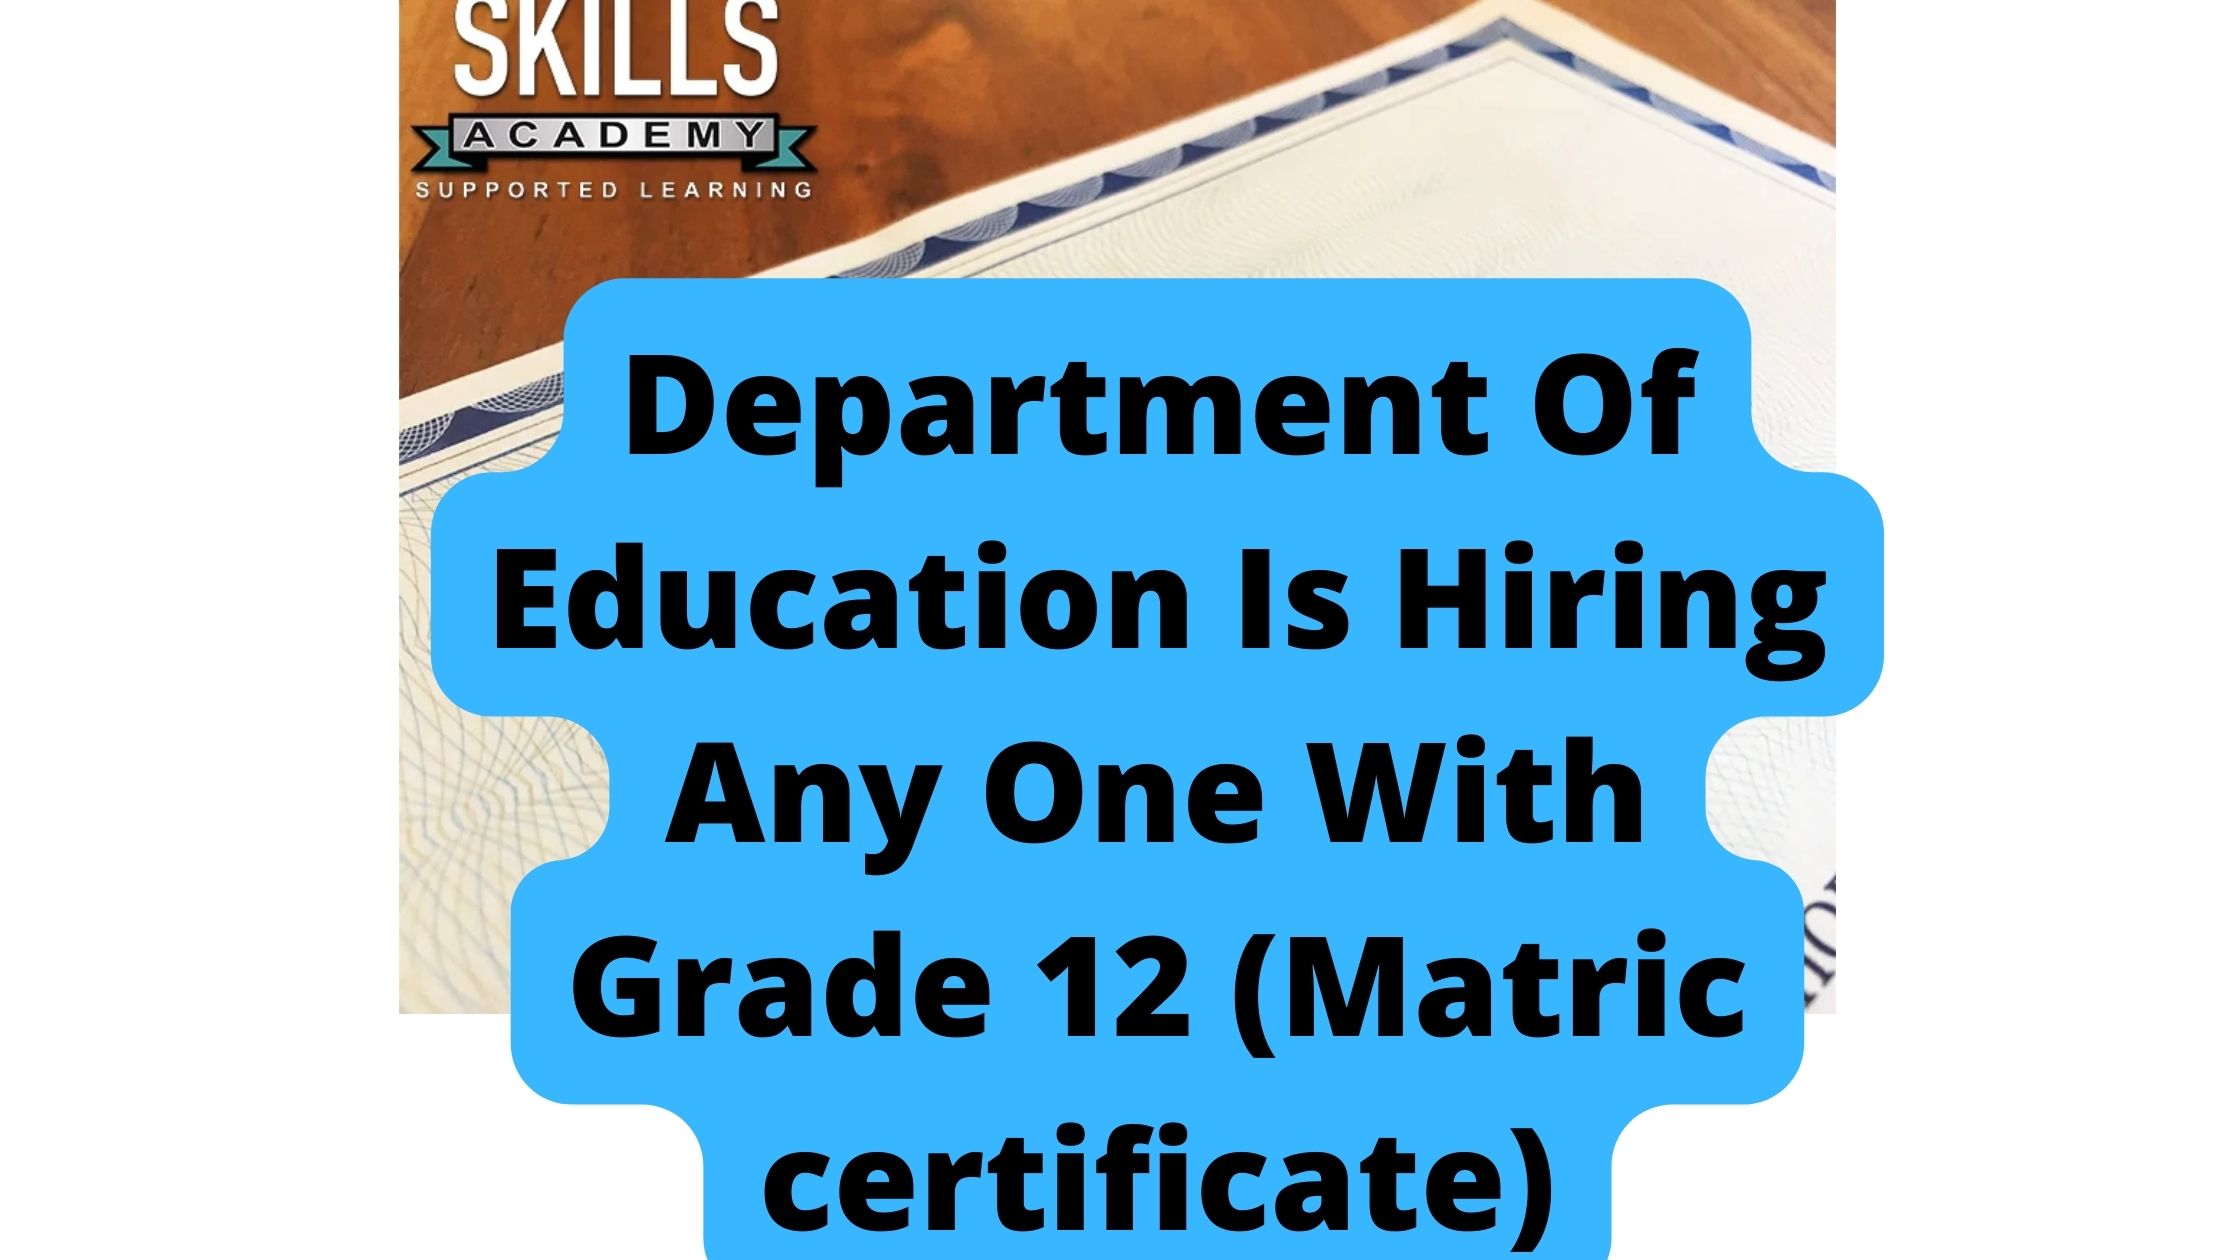 Department Of Education Is Hiring Any One With Grade 12 (Matric certificate)